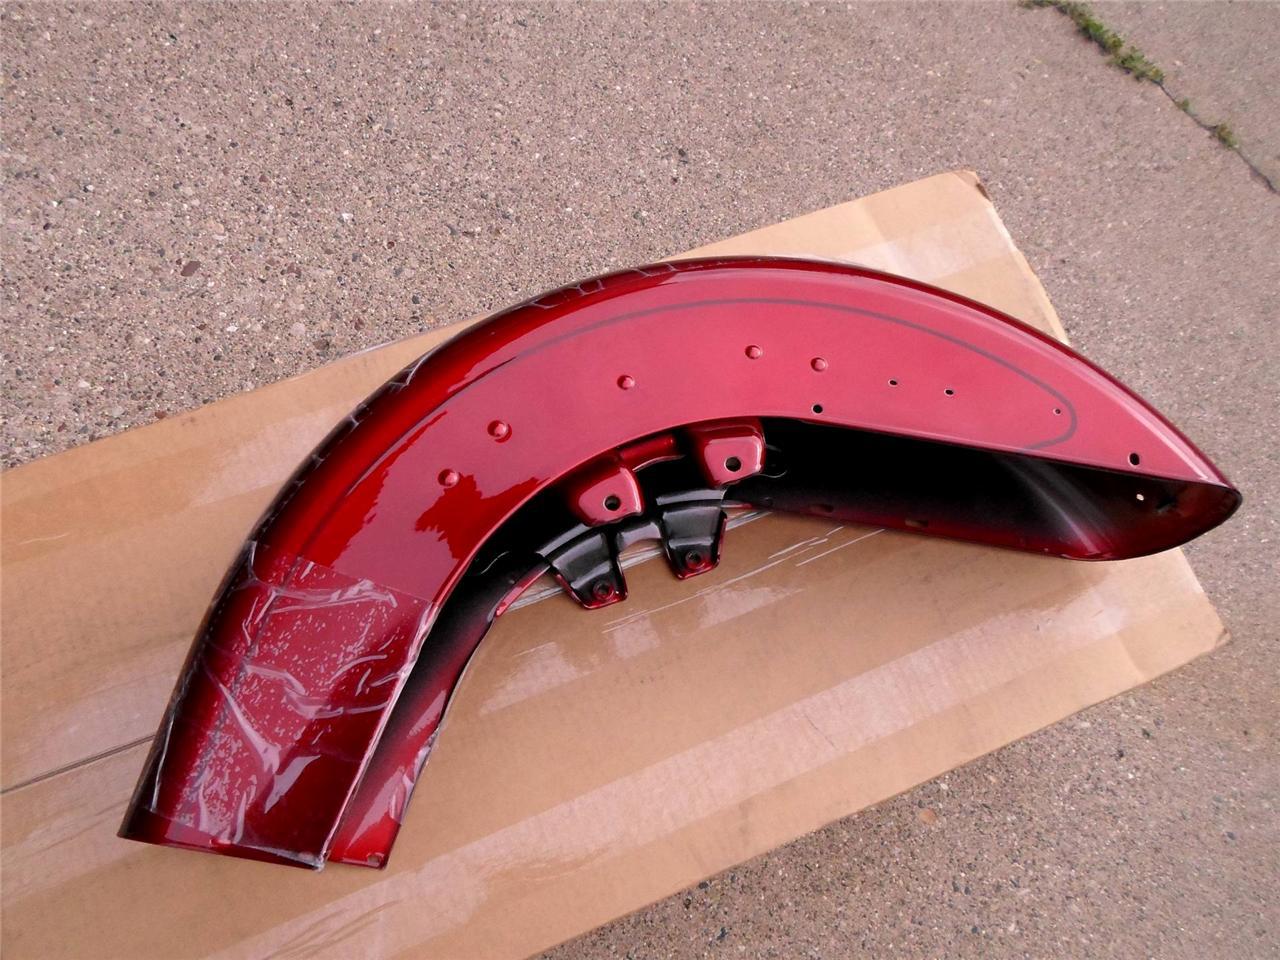 H-d touring front fender candy red sunglo flhtcu ultra classic electra glide